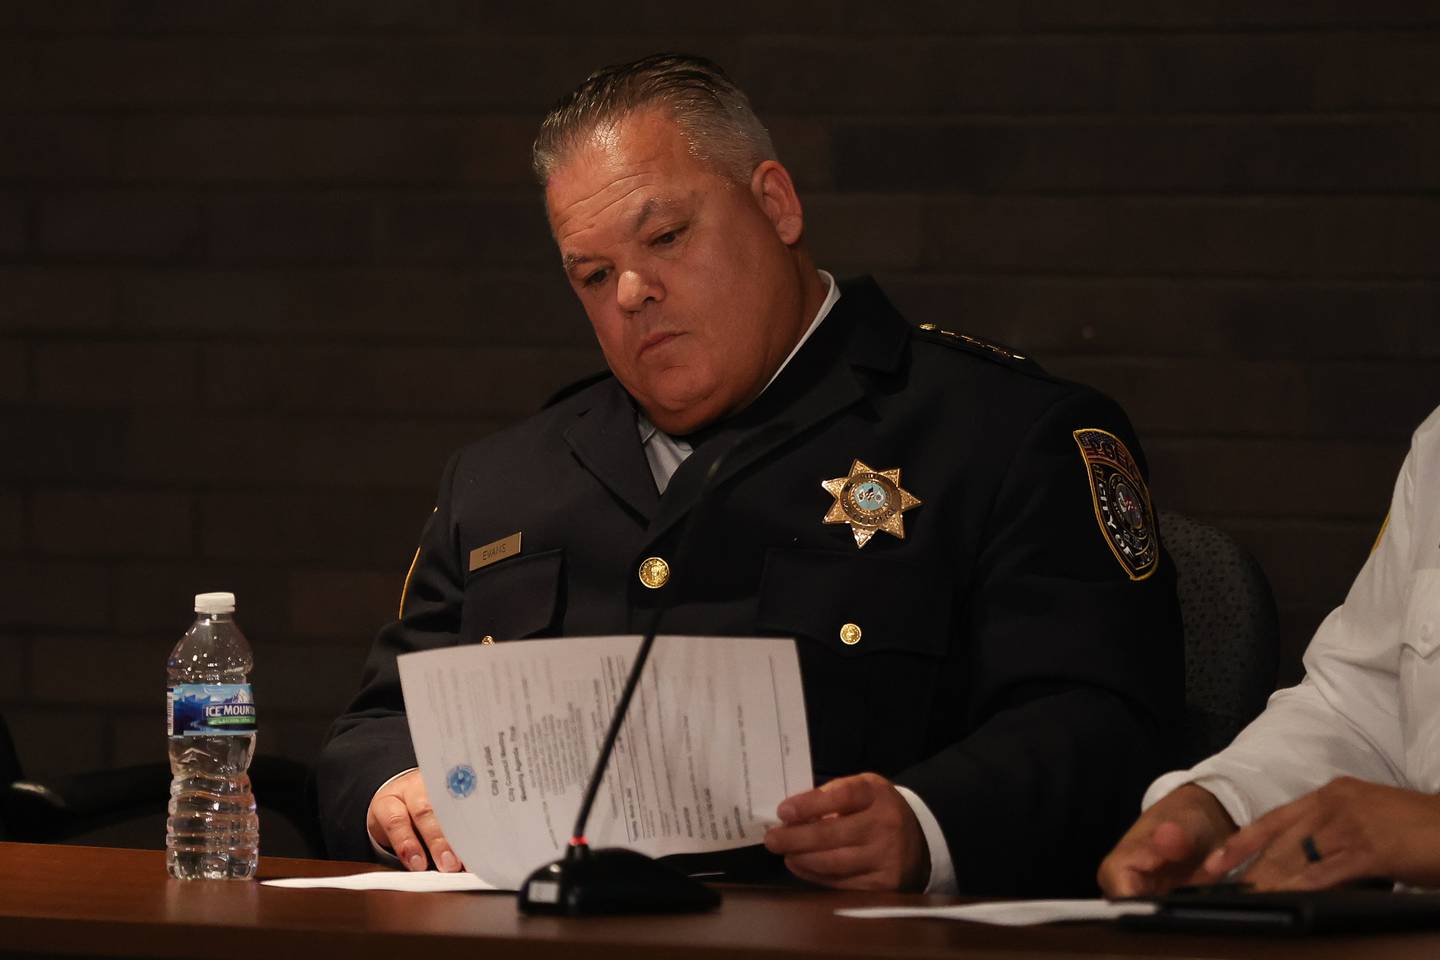 Joliet Police Chief William Evans looks over the meeting agenda at the Joliet City Council Meeting. Tuesday, Mar. 1, 2022, in Joliet.